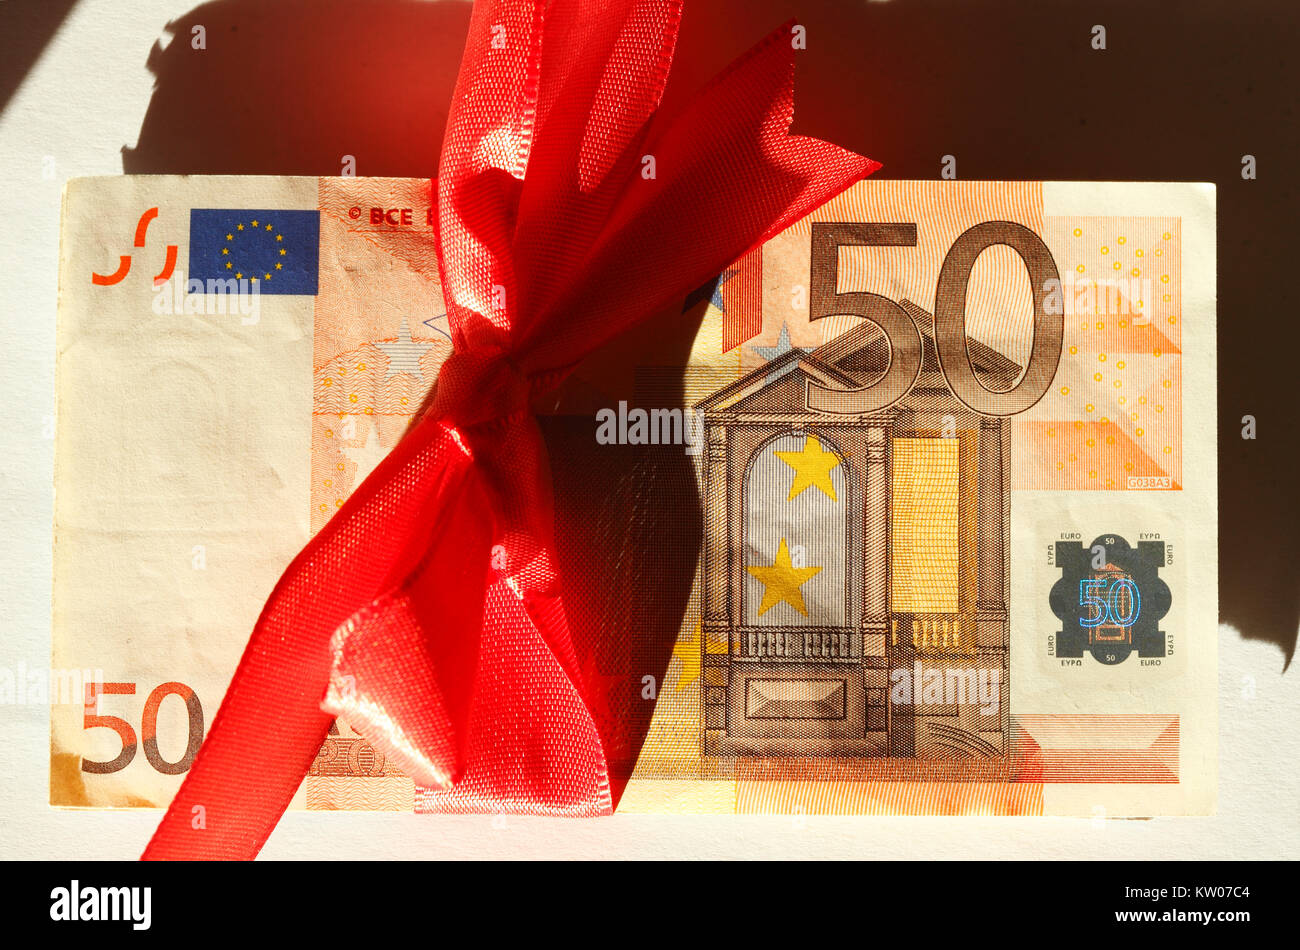 Fifty Euros Banknote with red loop as gift of money Stock Photo